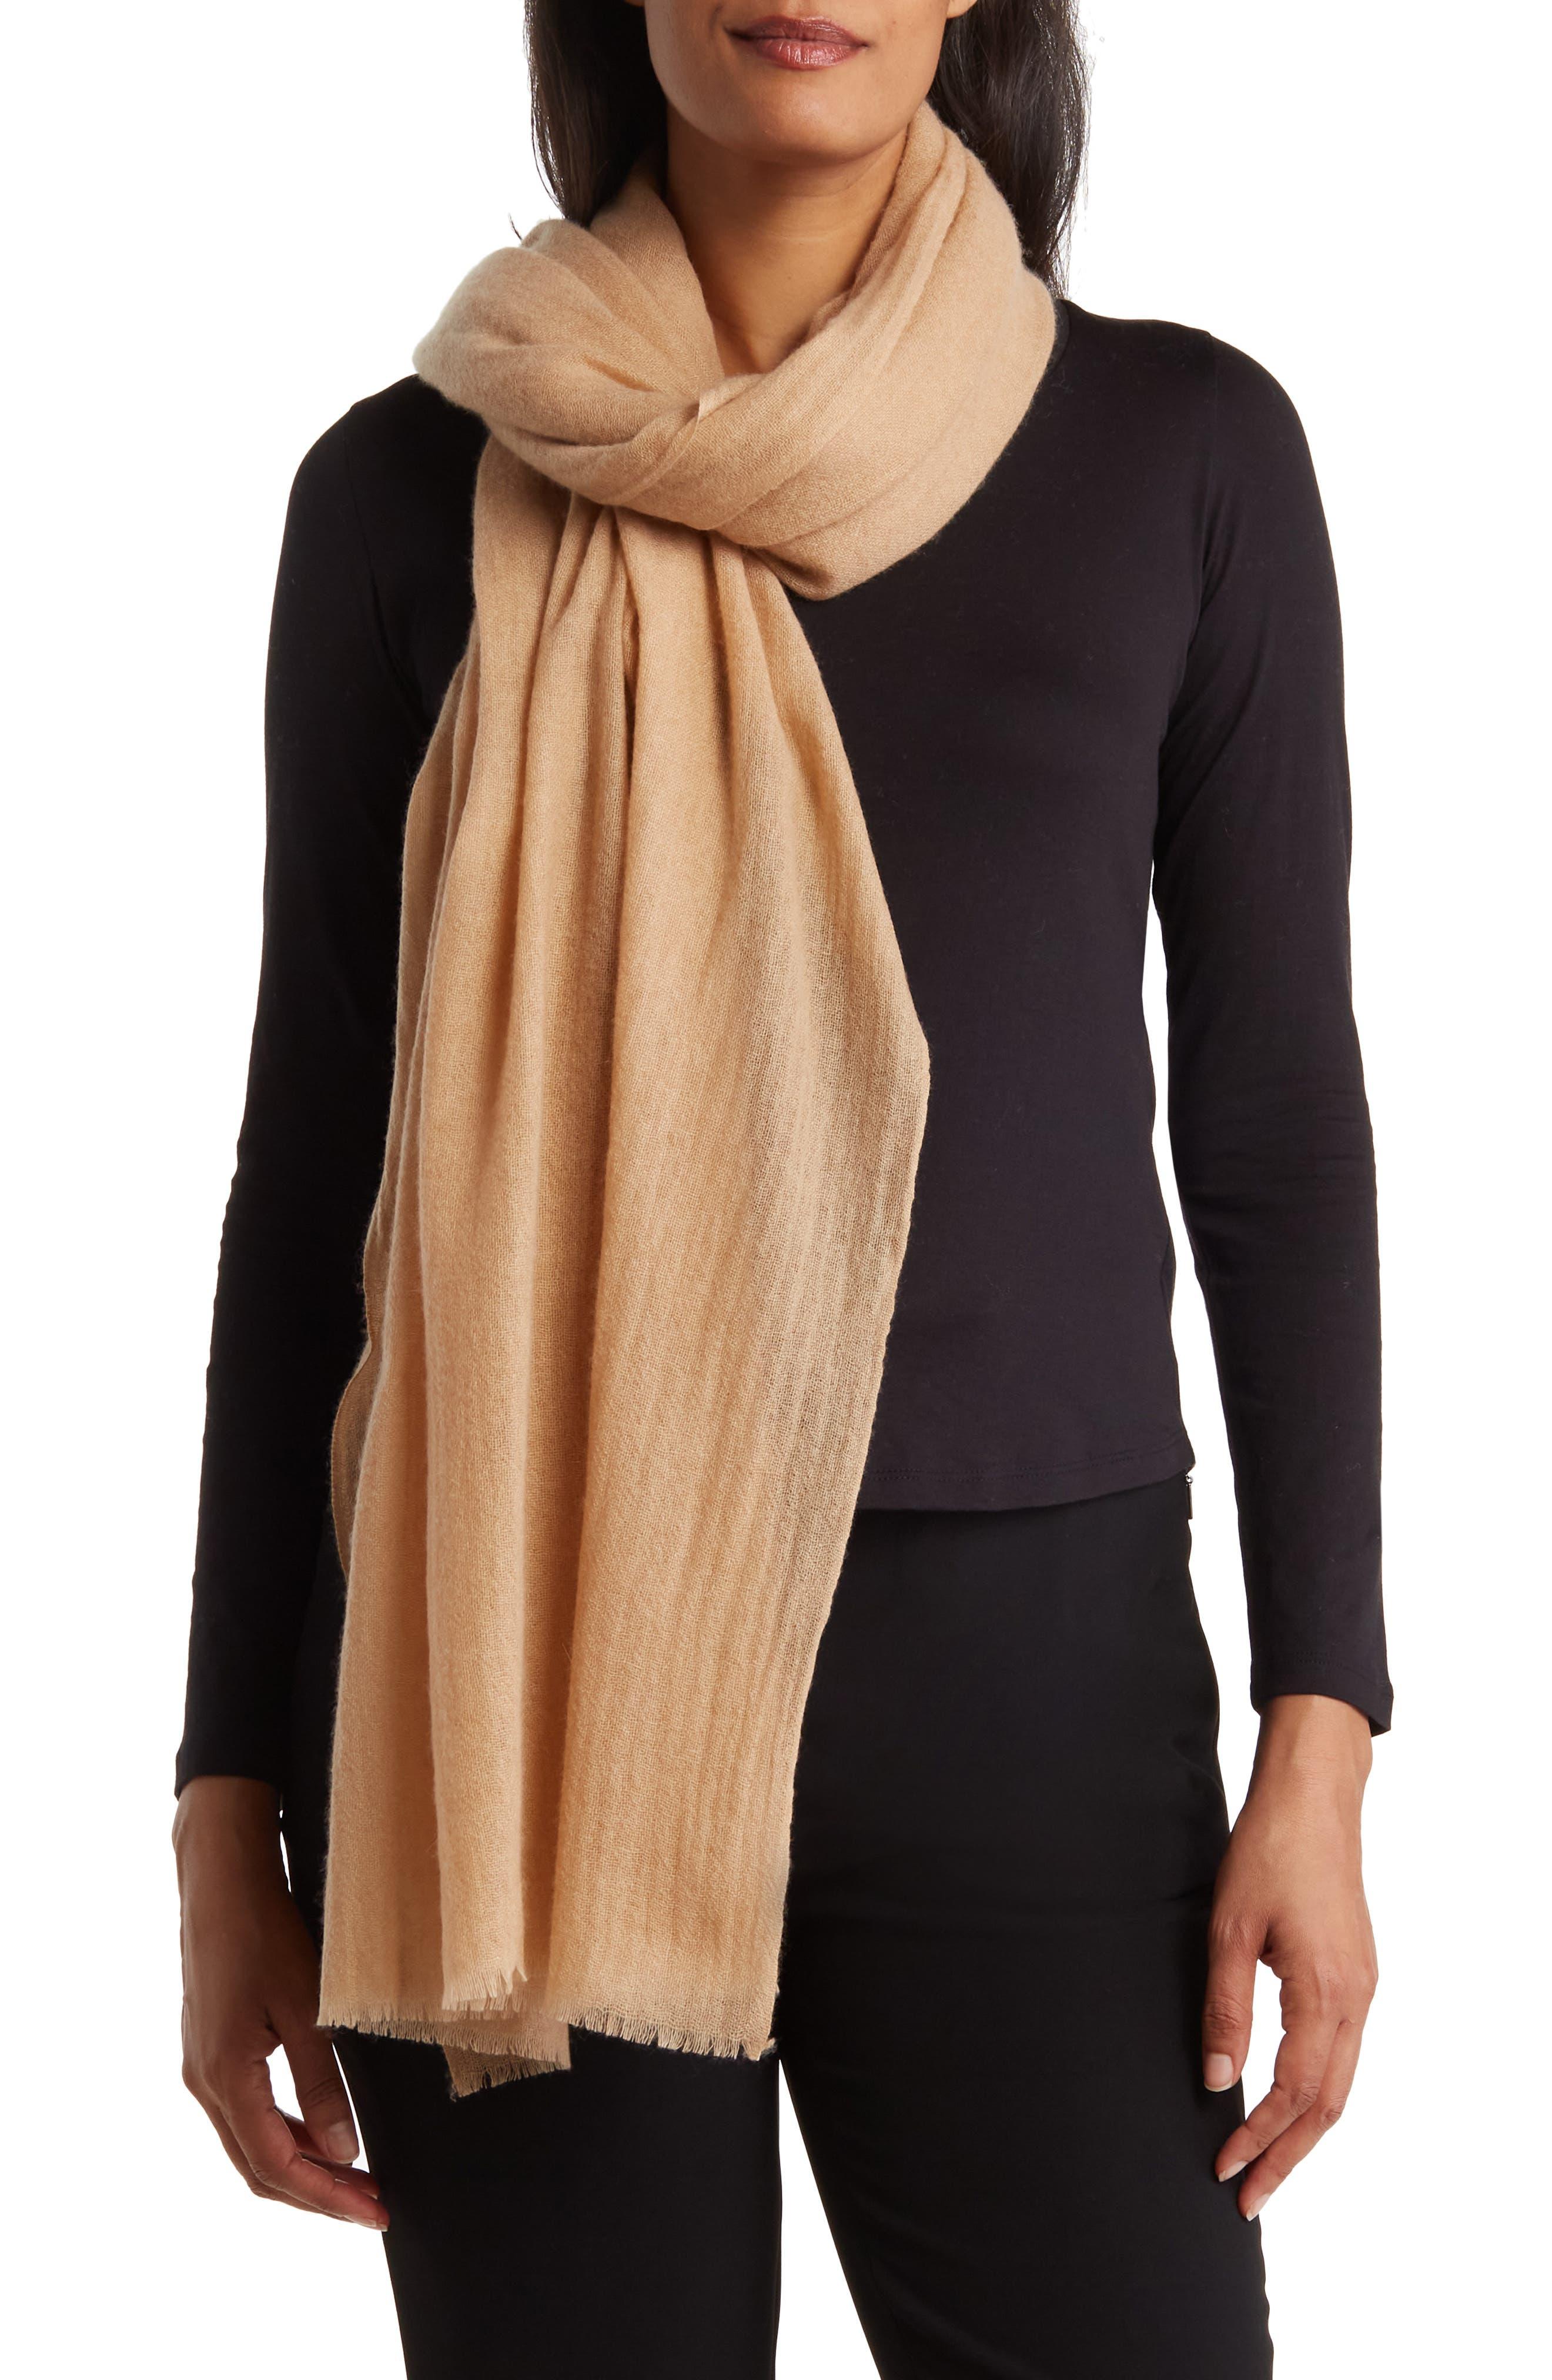 Amicale Cashmere Cheetah Patterned Scarf